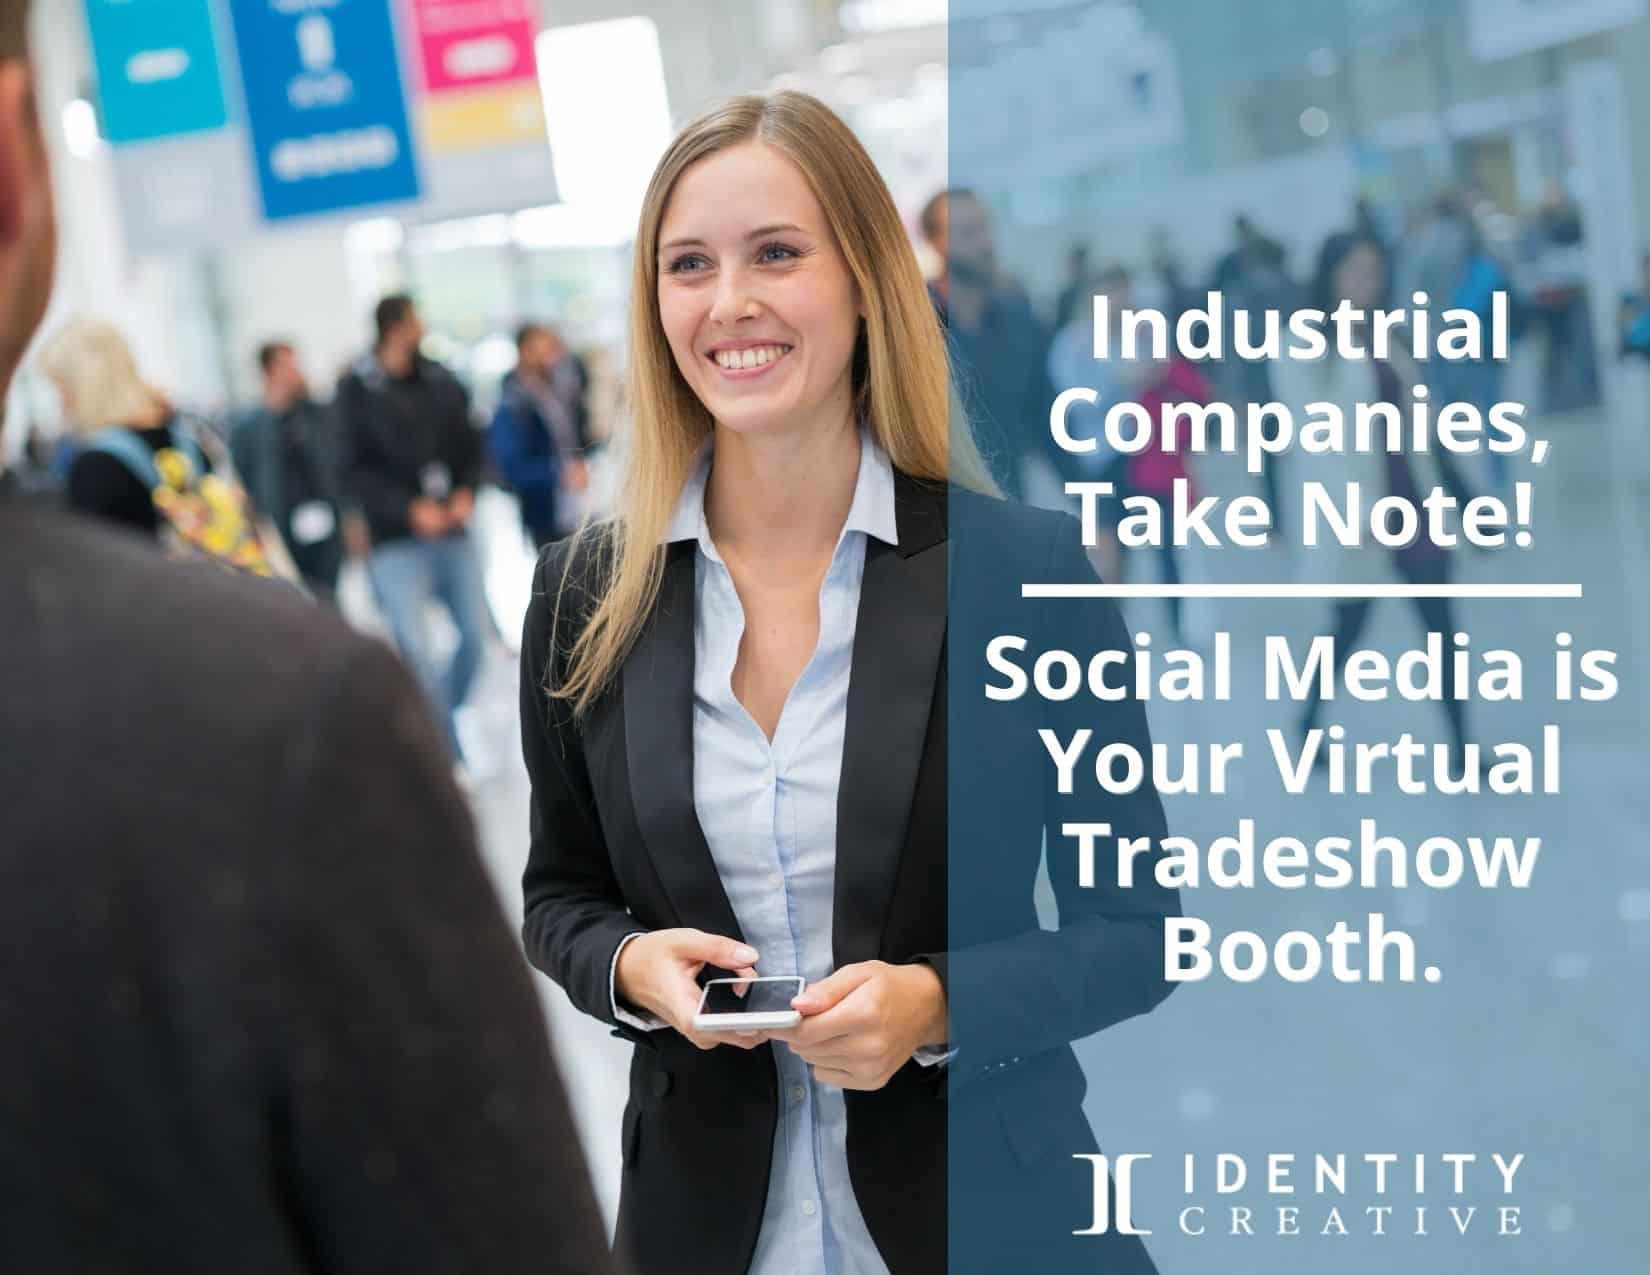 Social Media is Your Virtual Tradeshow Booth